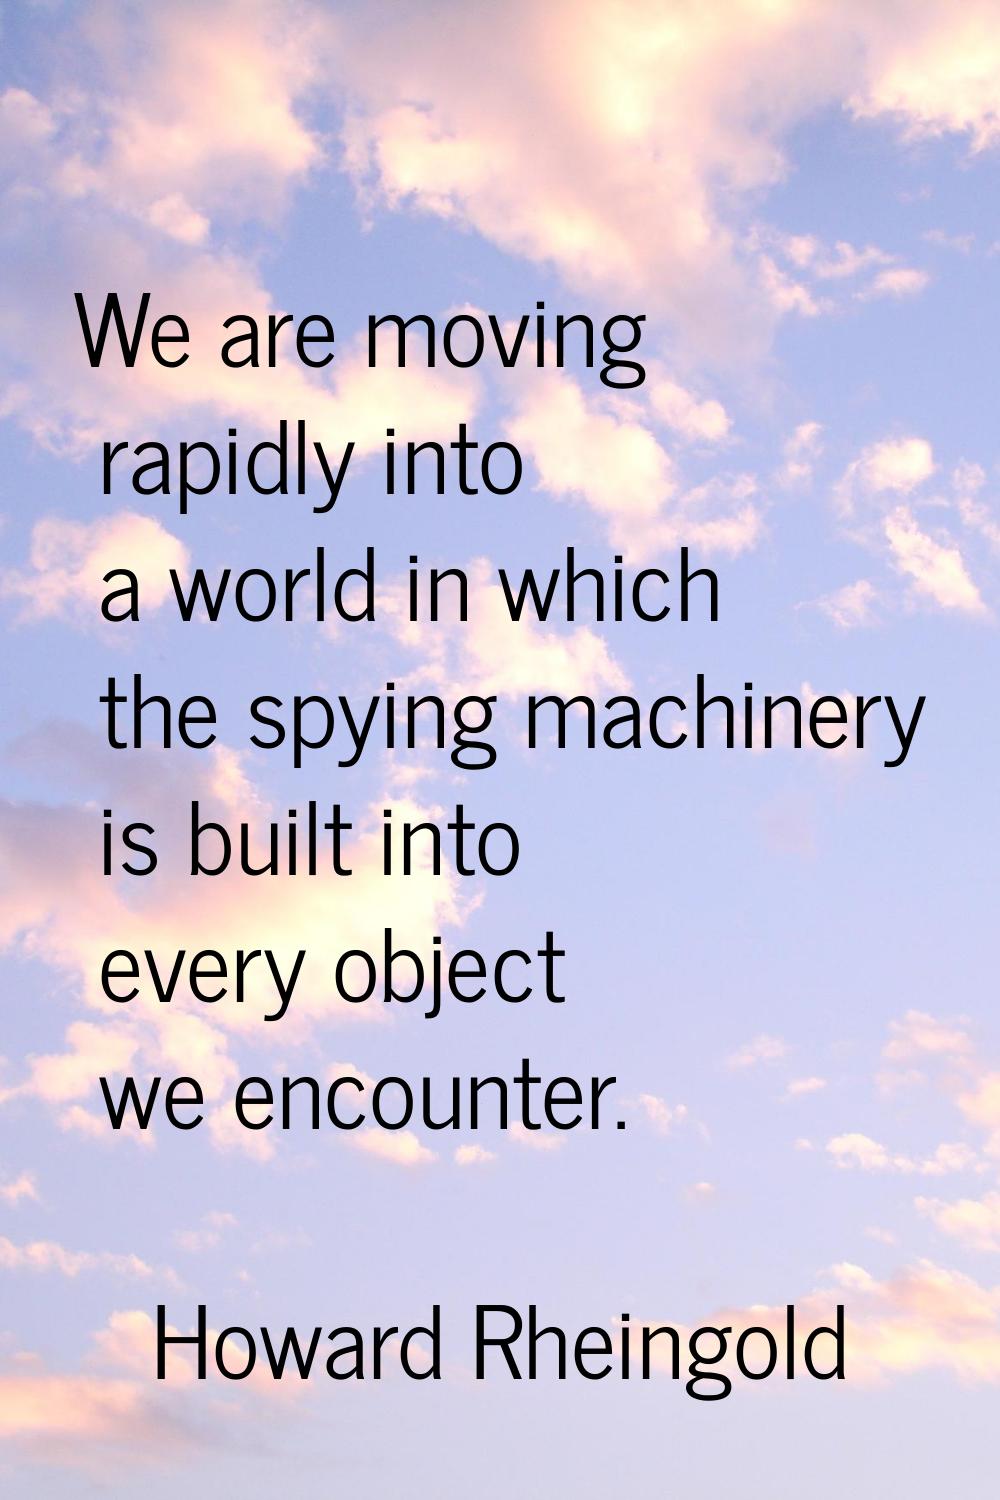 We are moving rapidly into a world in which the spying machinery is built into every object we enco